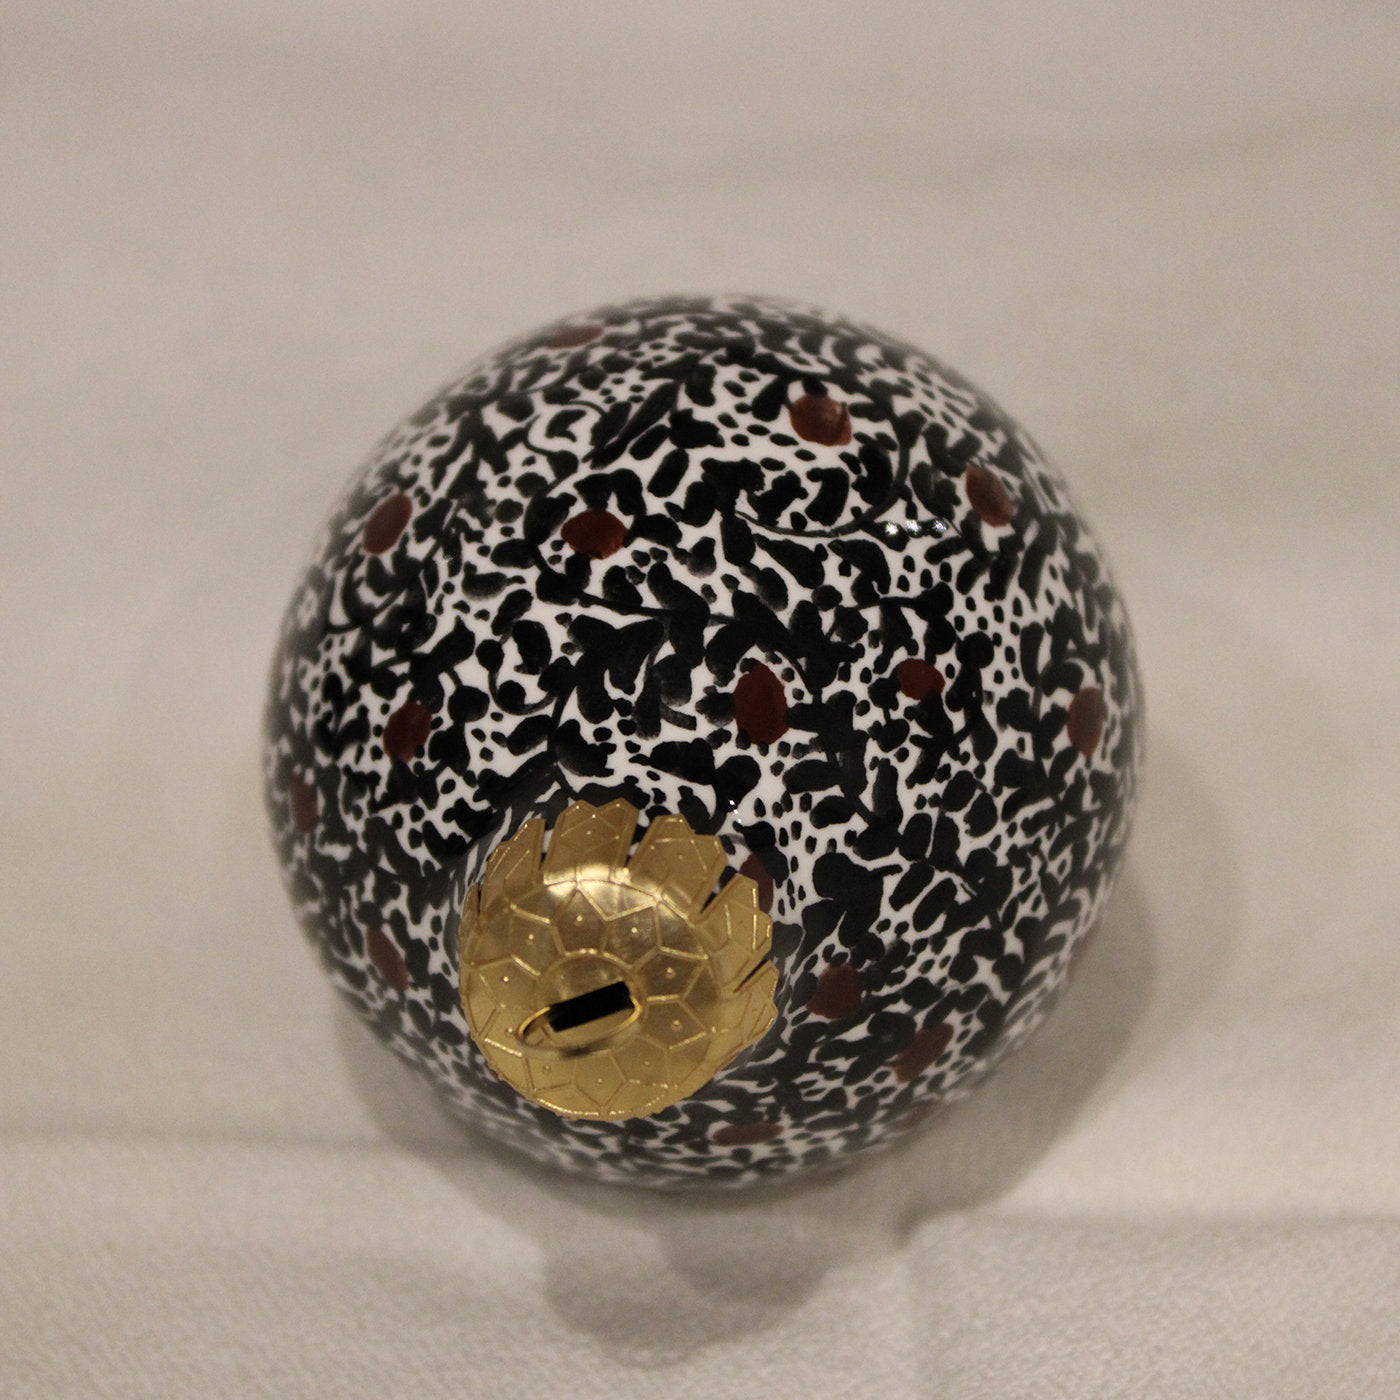 Black Dotted Floral Teardrop Christmas Ball Ornament  - Alternative view 1